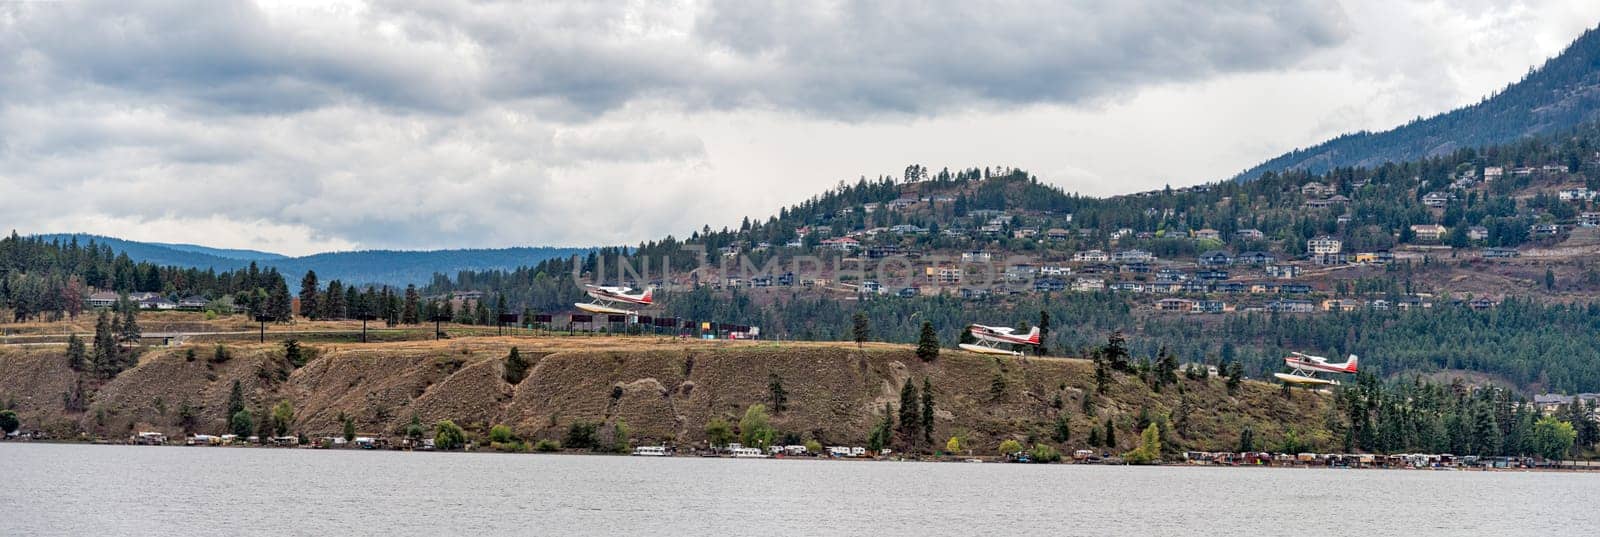 A small seaplane taking off a water surface on overcast day in Okanagan valley